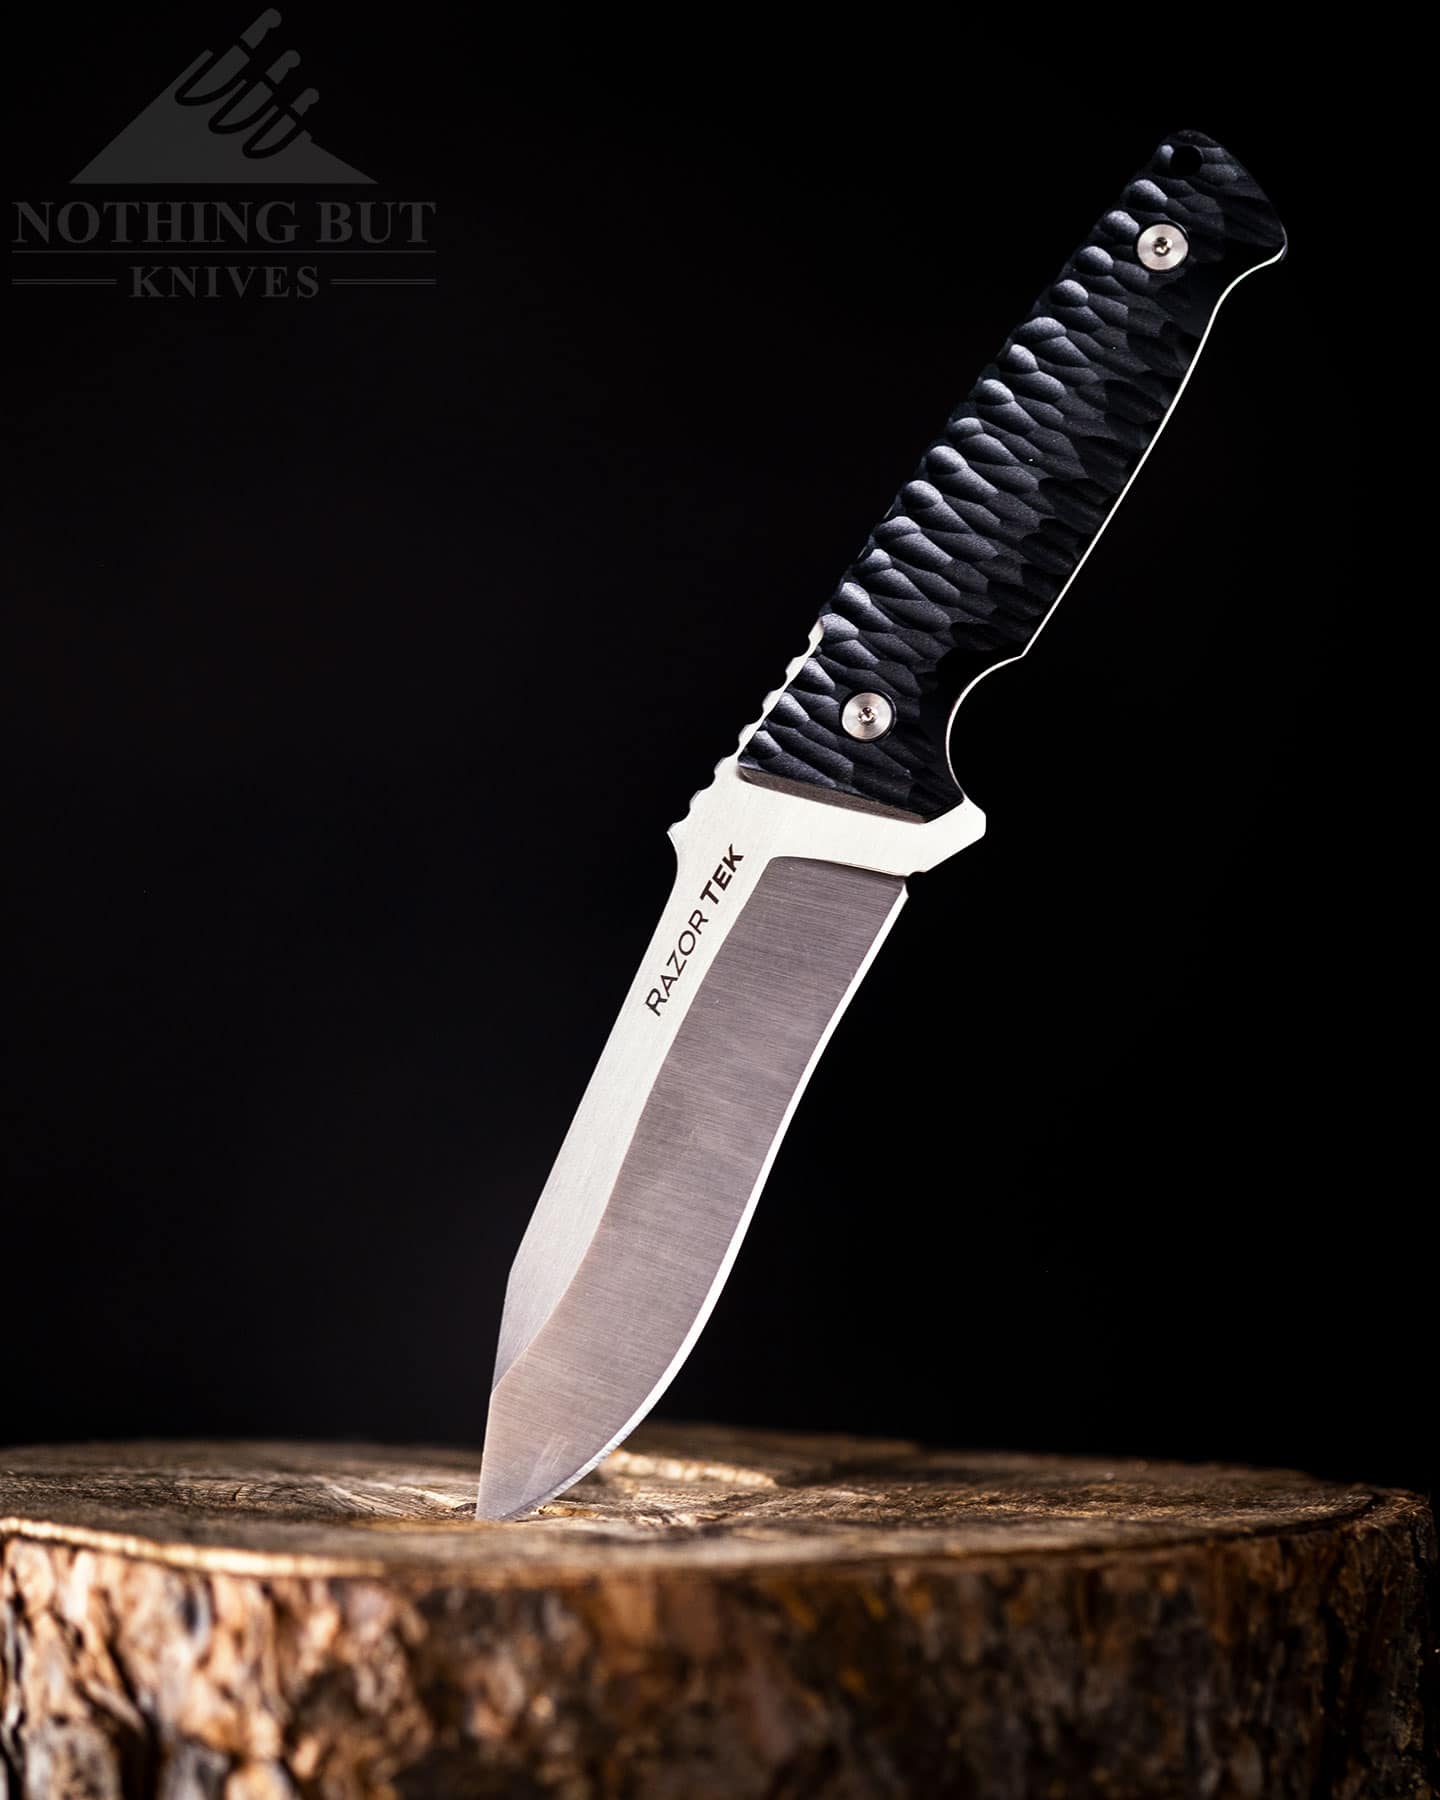 The release Razor Tek knife proved that Cold Steel is still committed to producing tactical knives. 